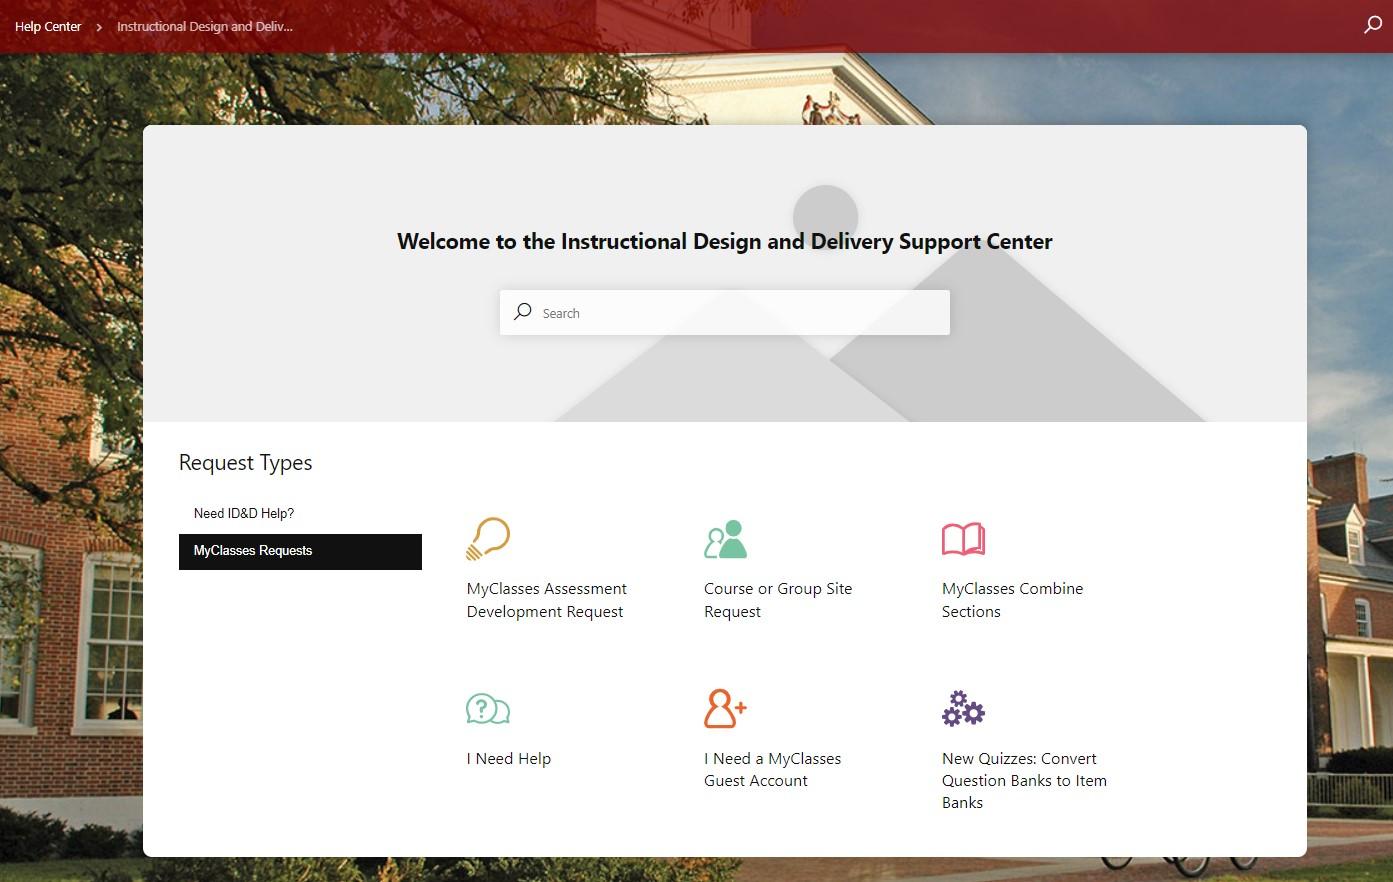 ID&D Support Center page